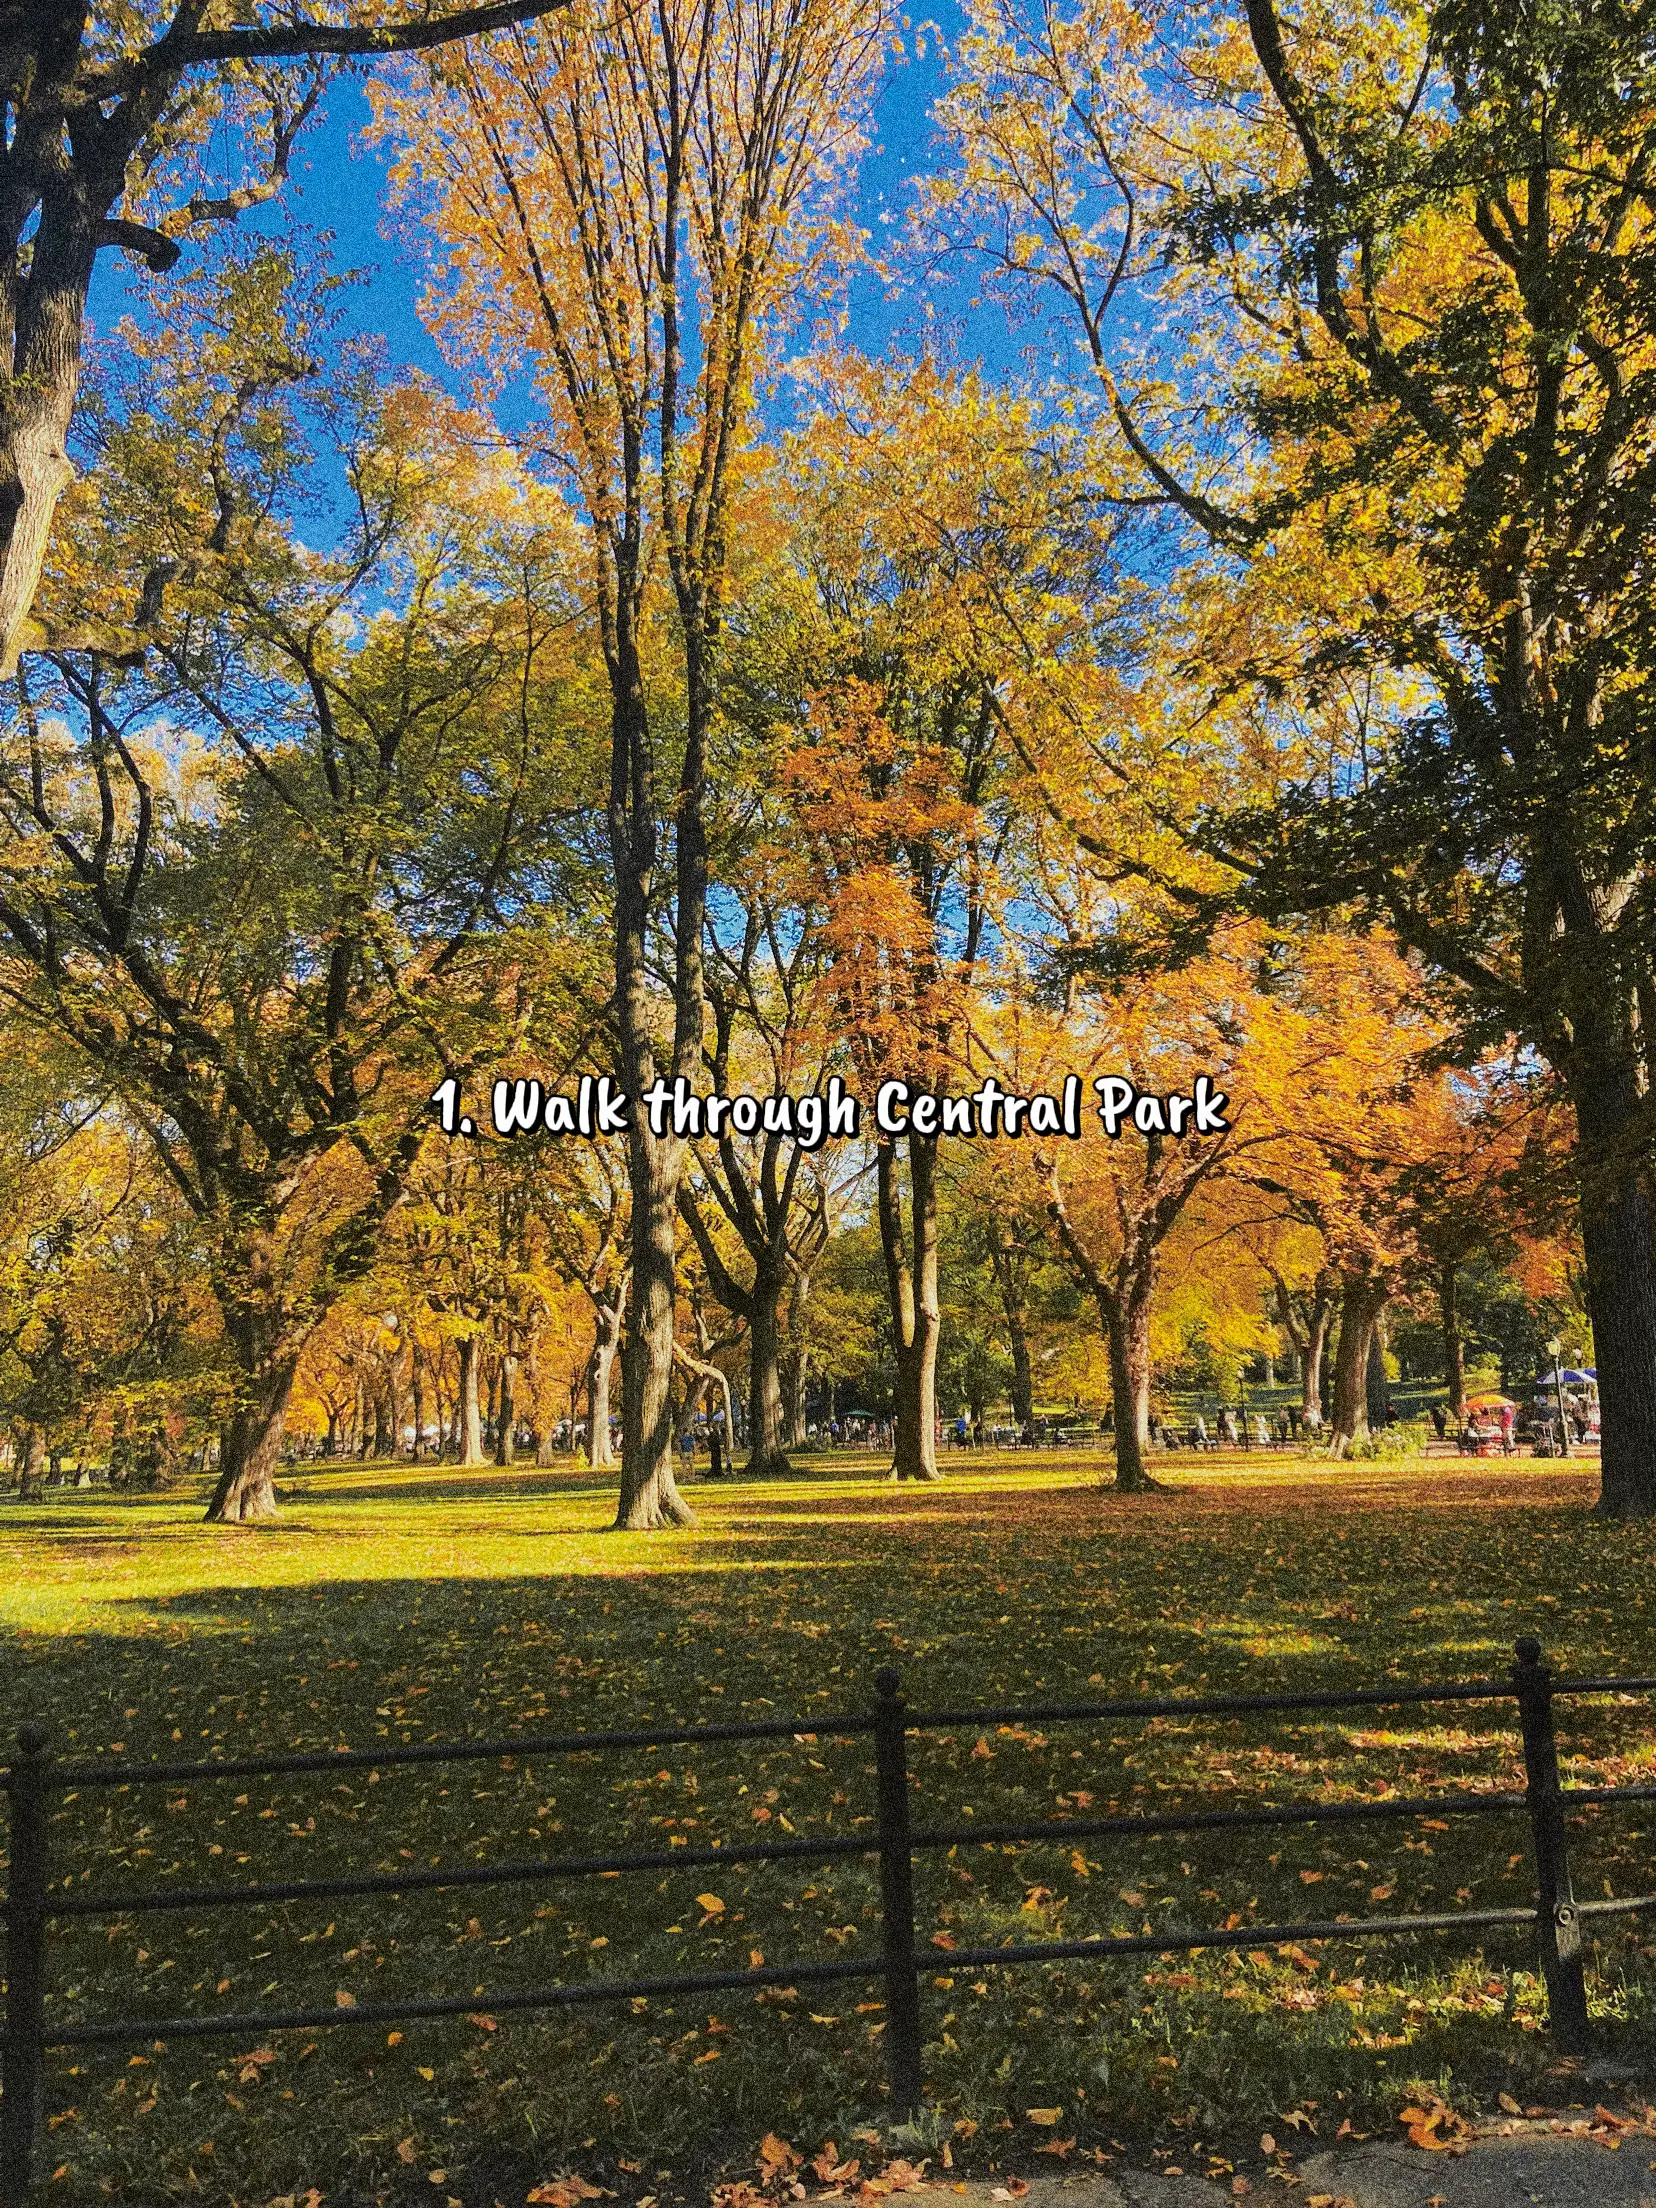  A field of trees with a sign that says "walk through Central Park".